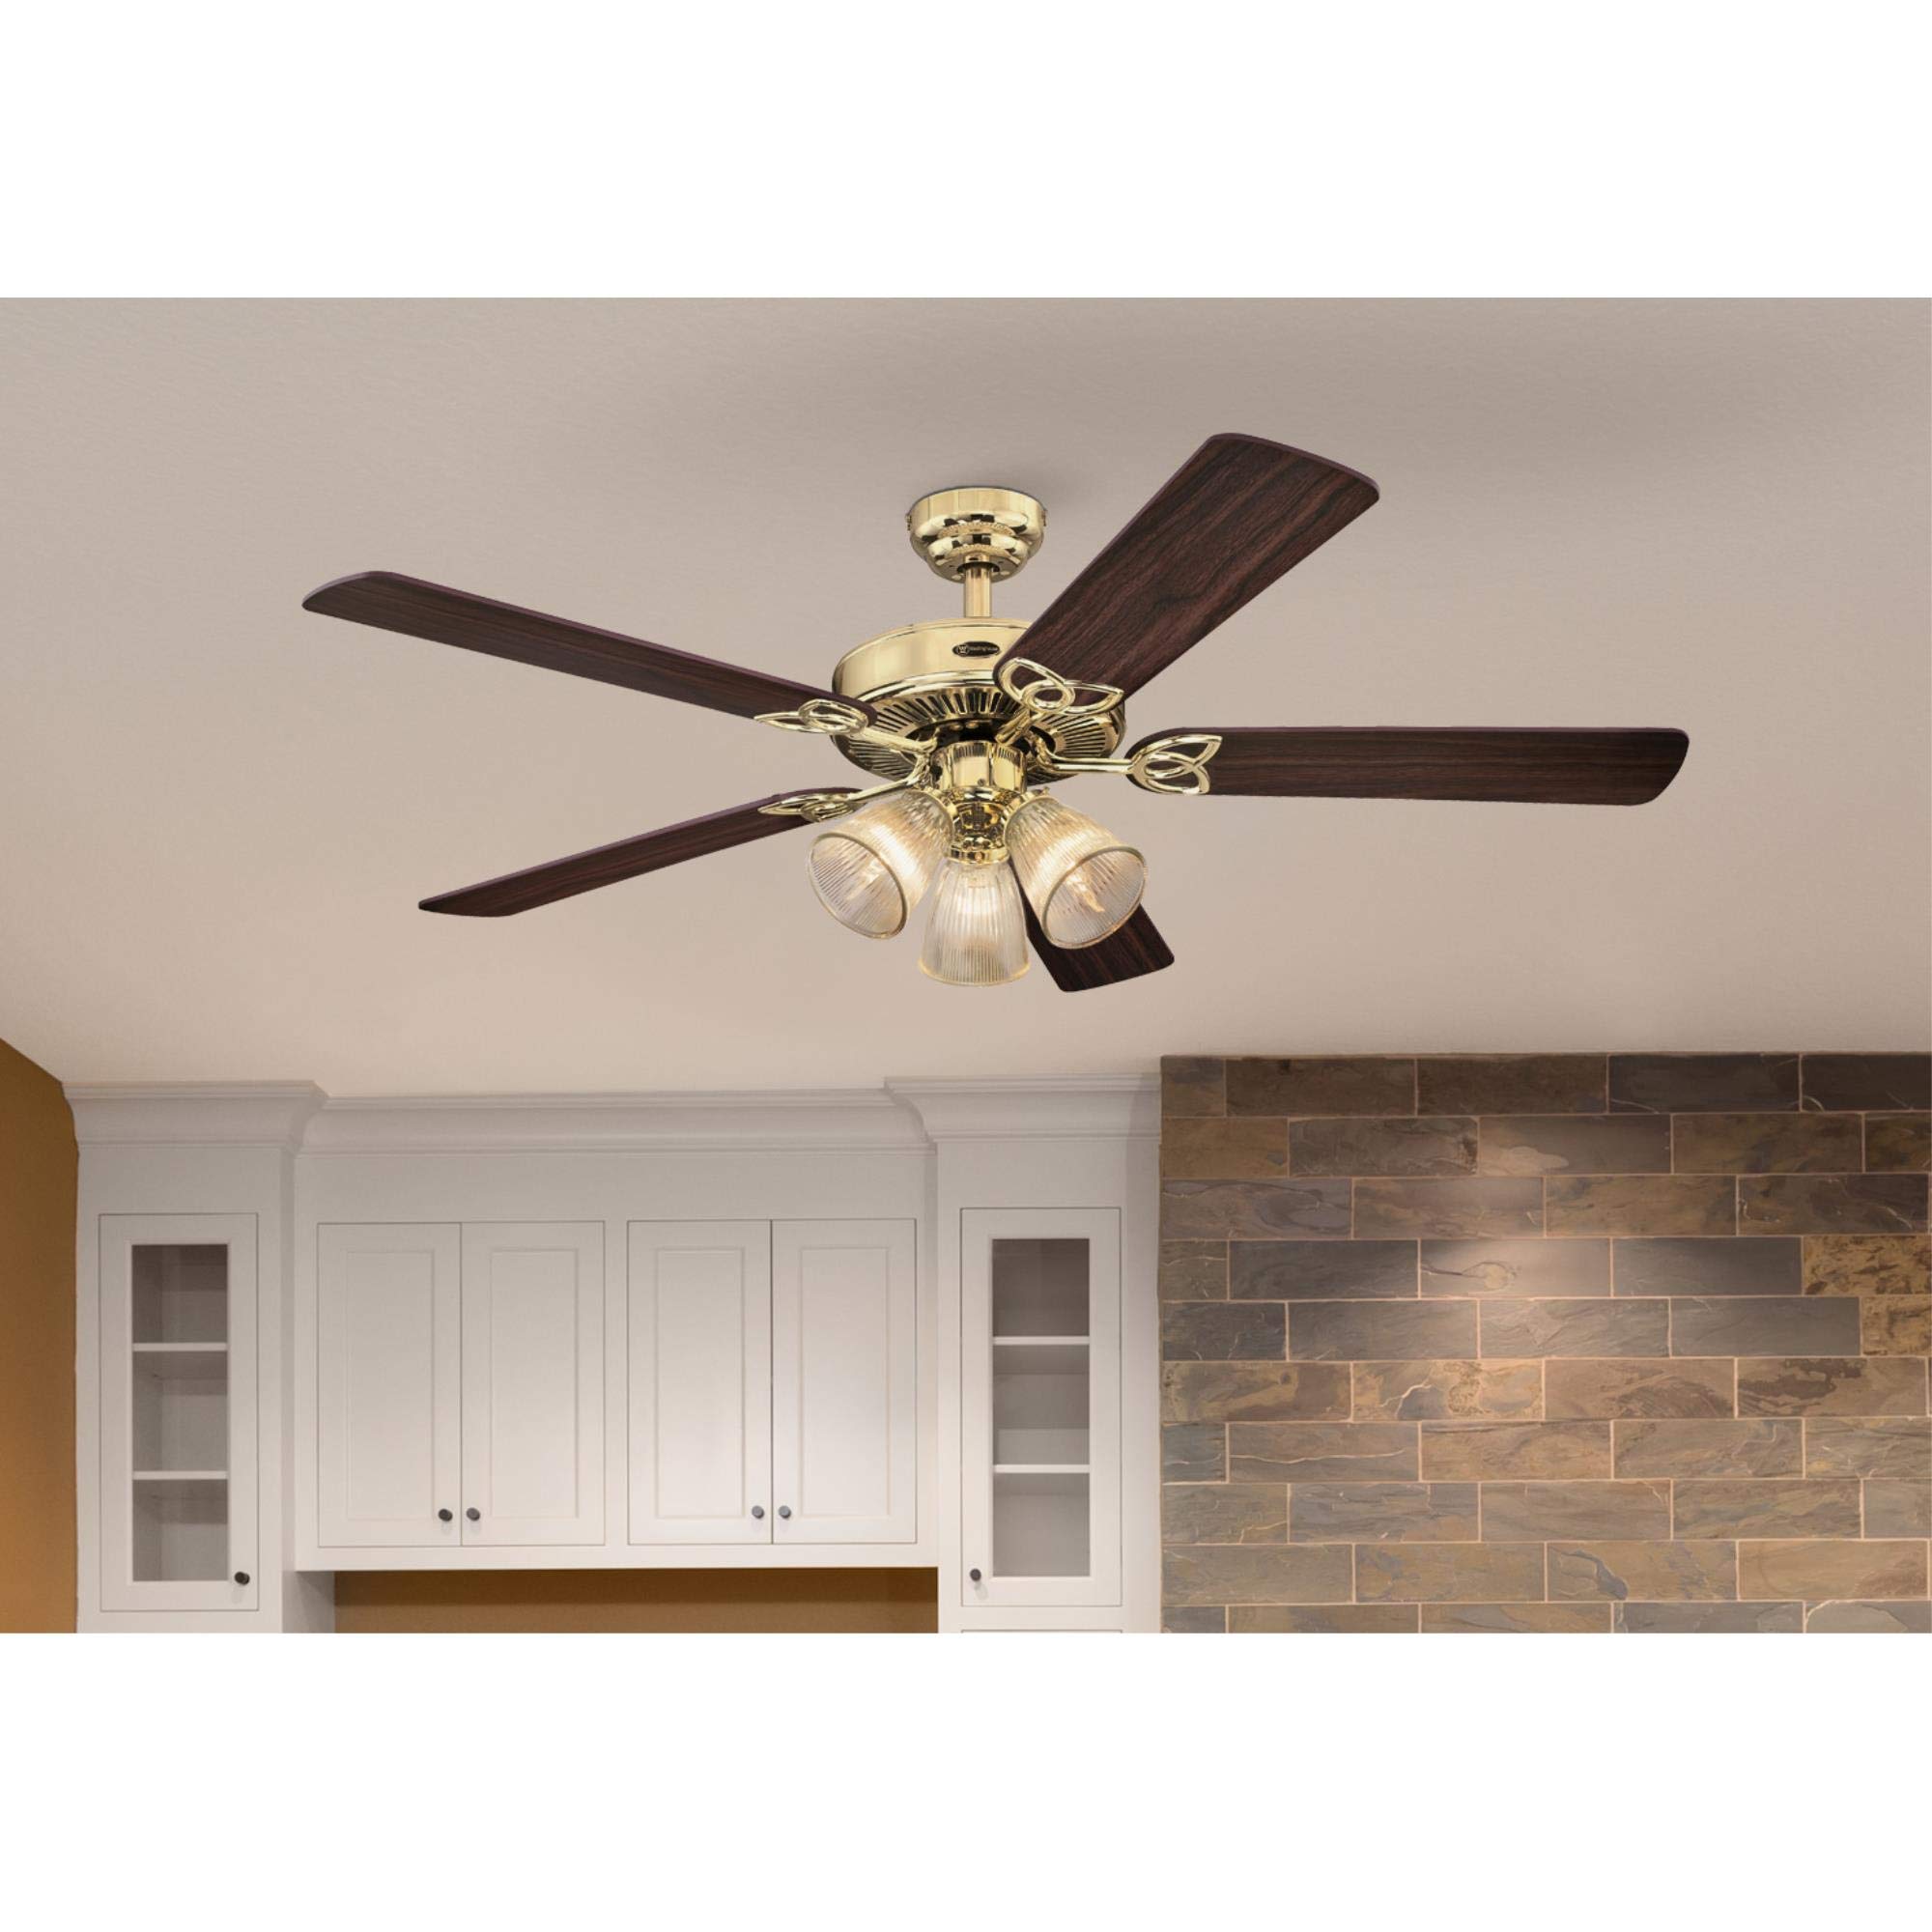 Westinghouse Lighting 7233800 Vintage Indoor Ceiling Fan with Light, 52 Inch, Polished Brass